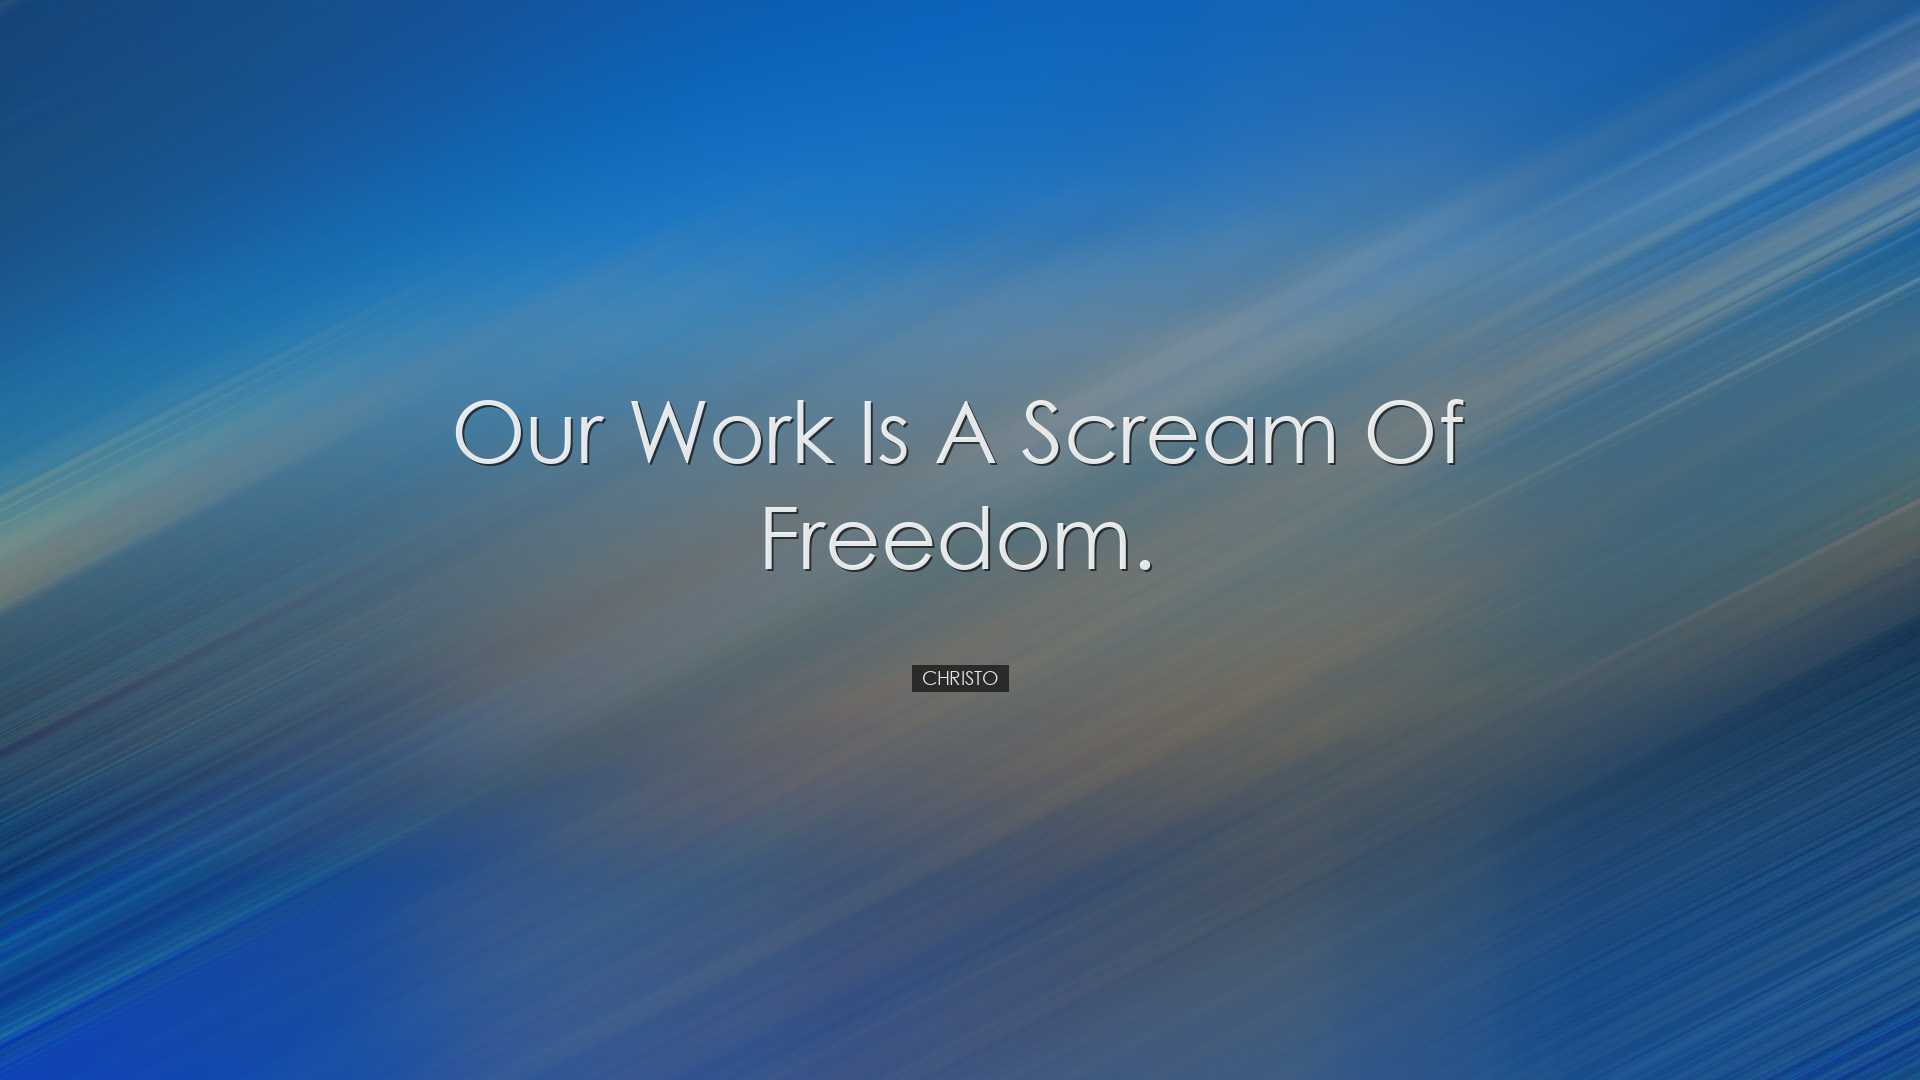 Our work is a scream of freedom. - Christo